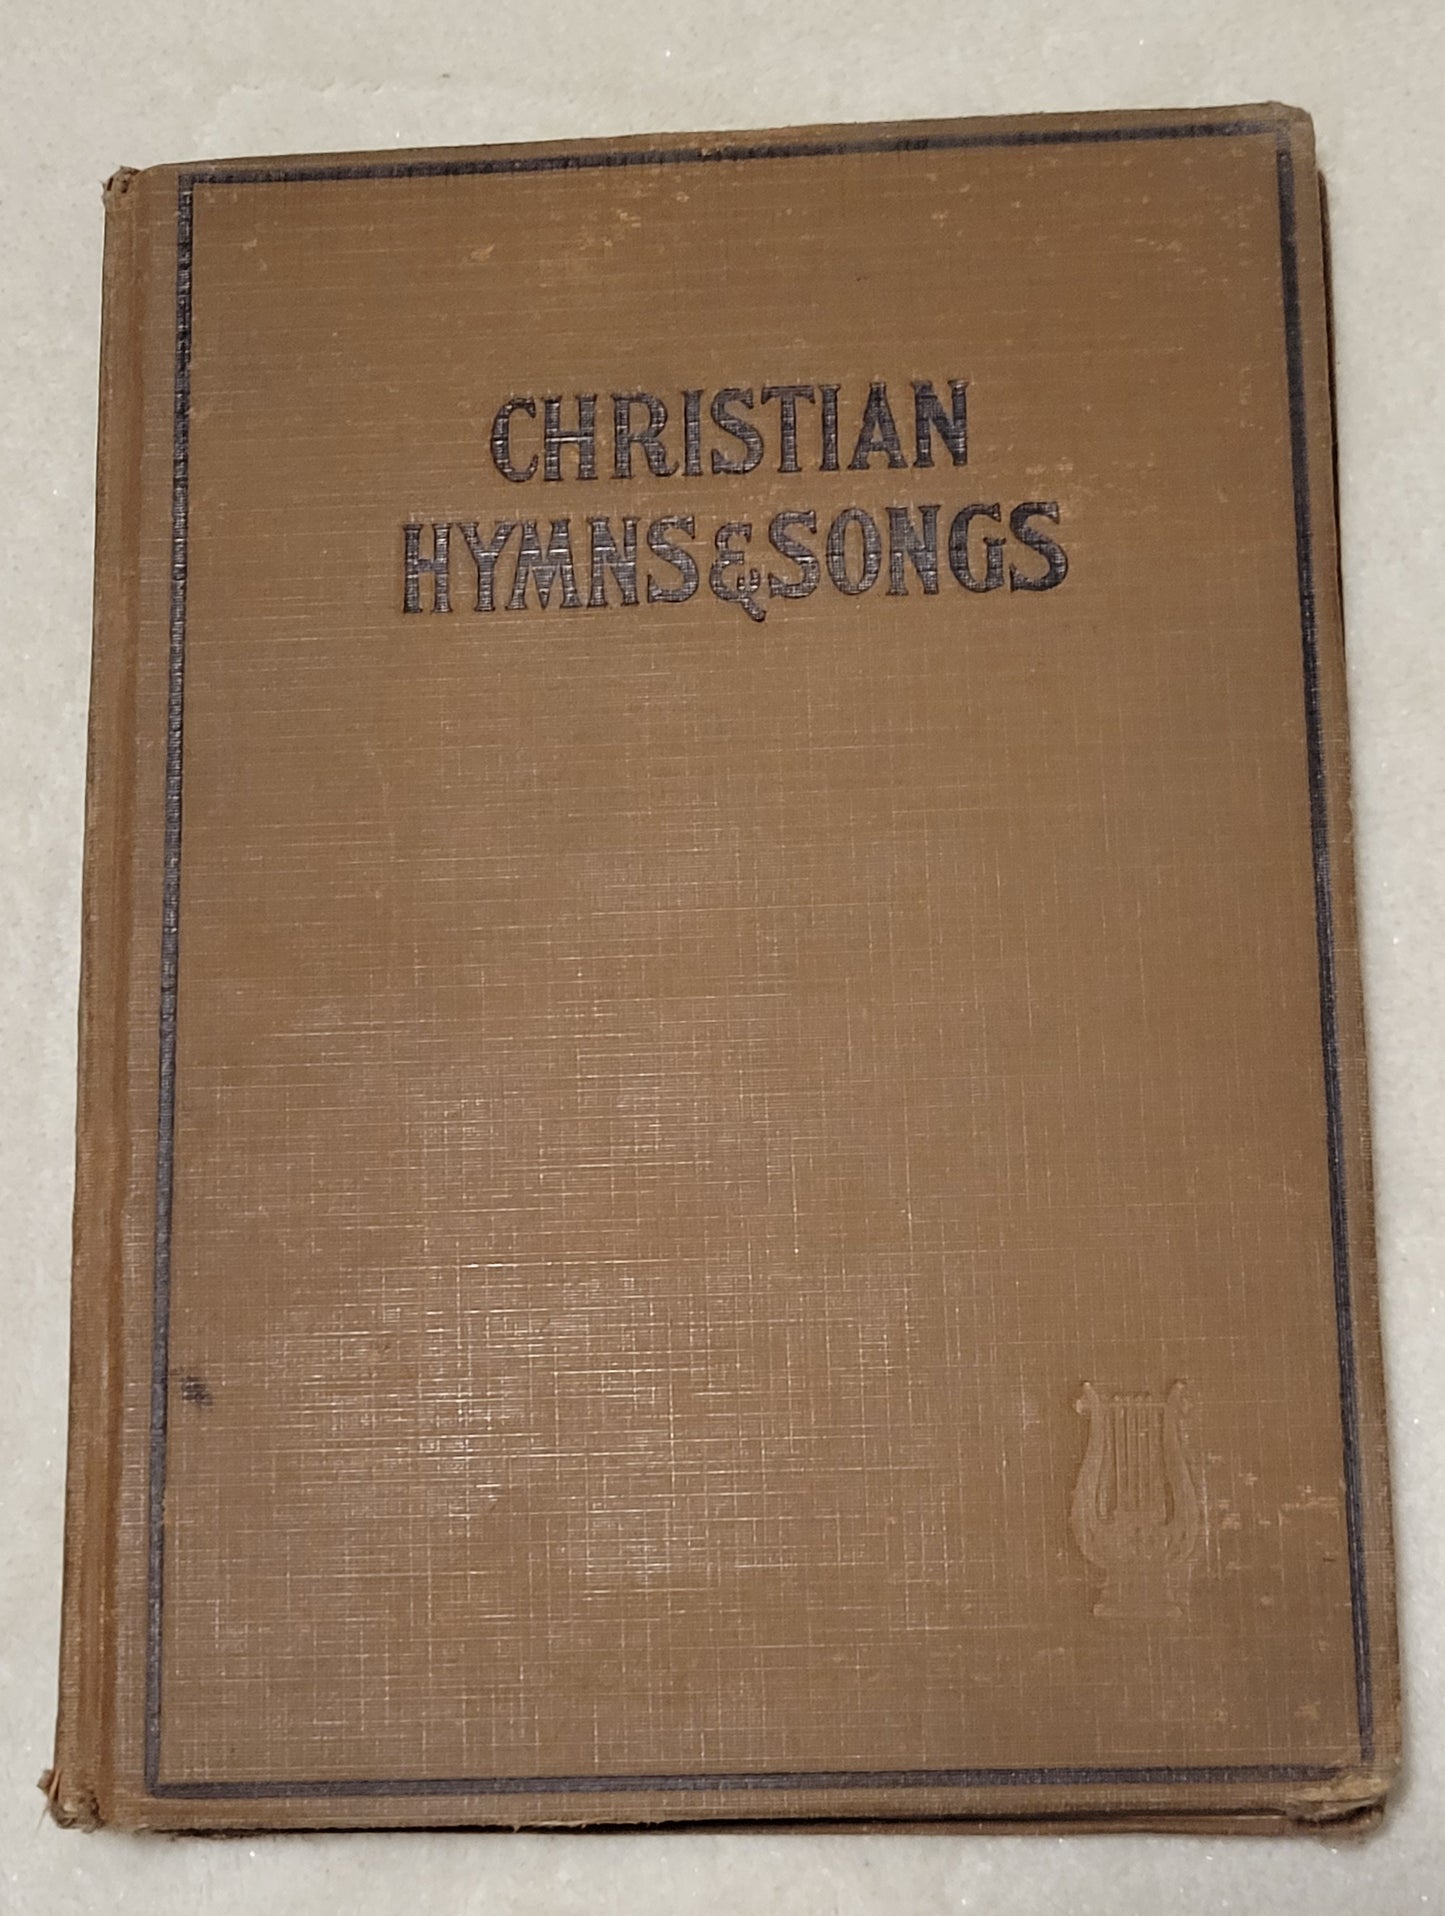 An antique book of Christian hymns and songs, published by Hall-Mack Co in Philadelphia in 1931. Front view.